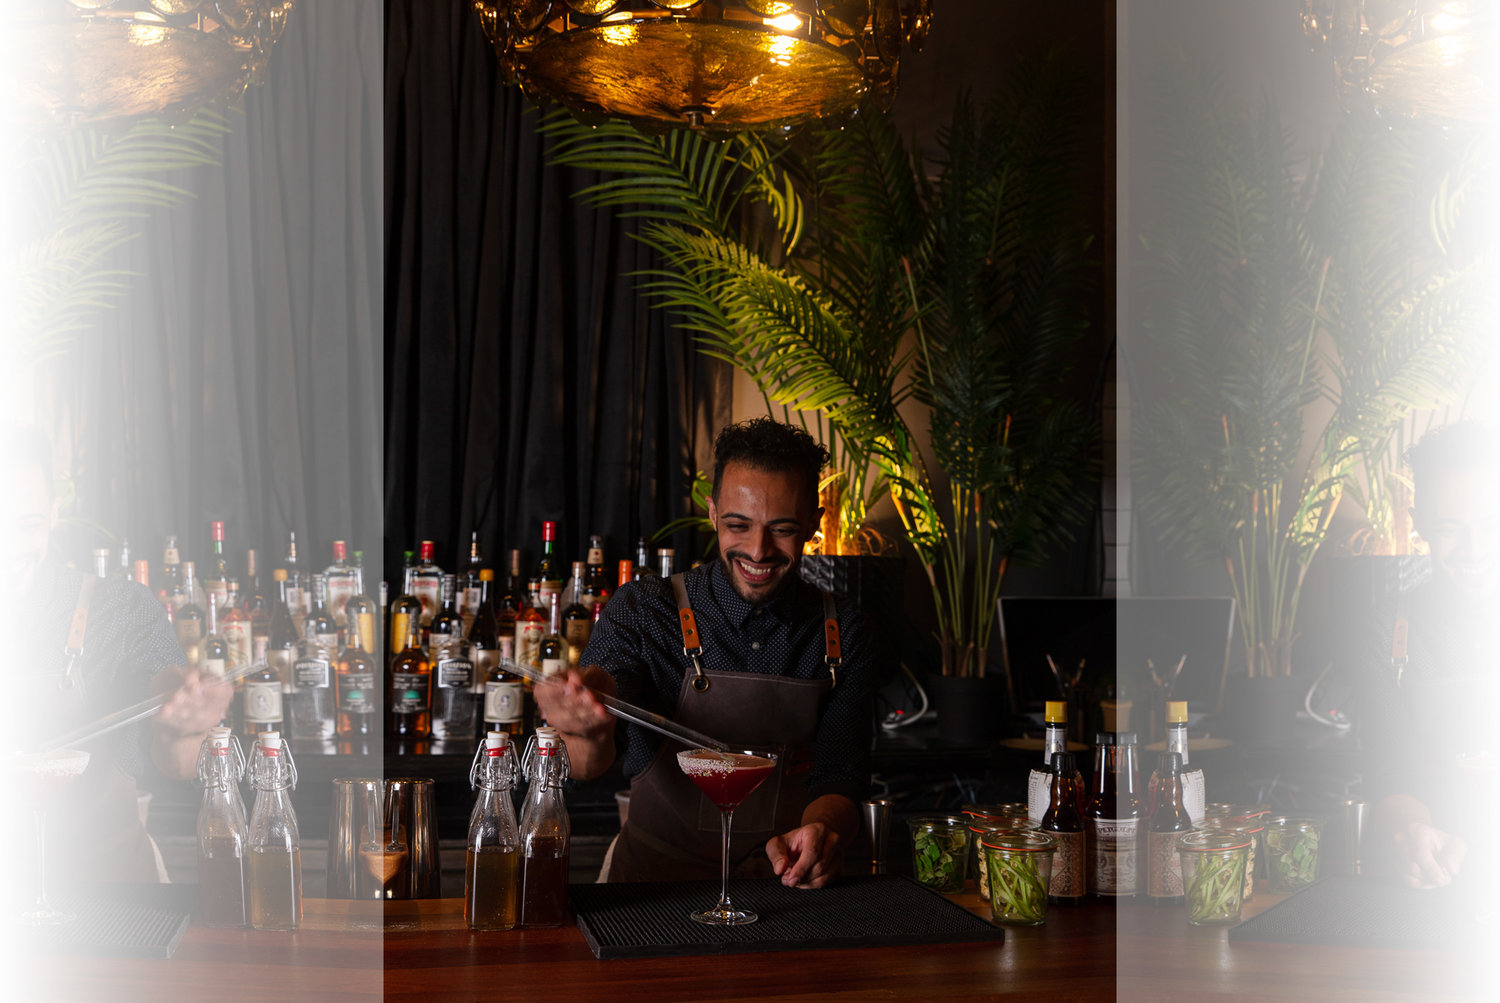 Mixologist Darnell Holguin adds the finishing touch on a craft cocktail from 345